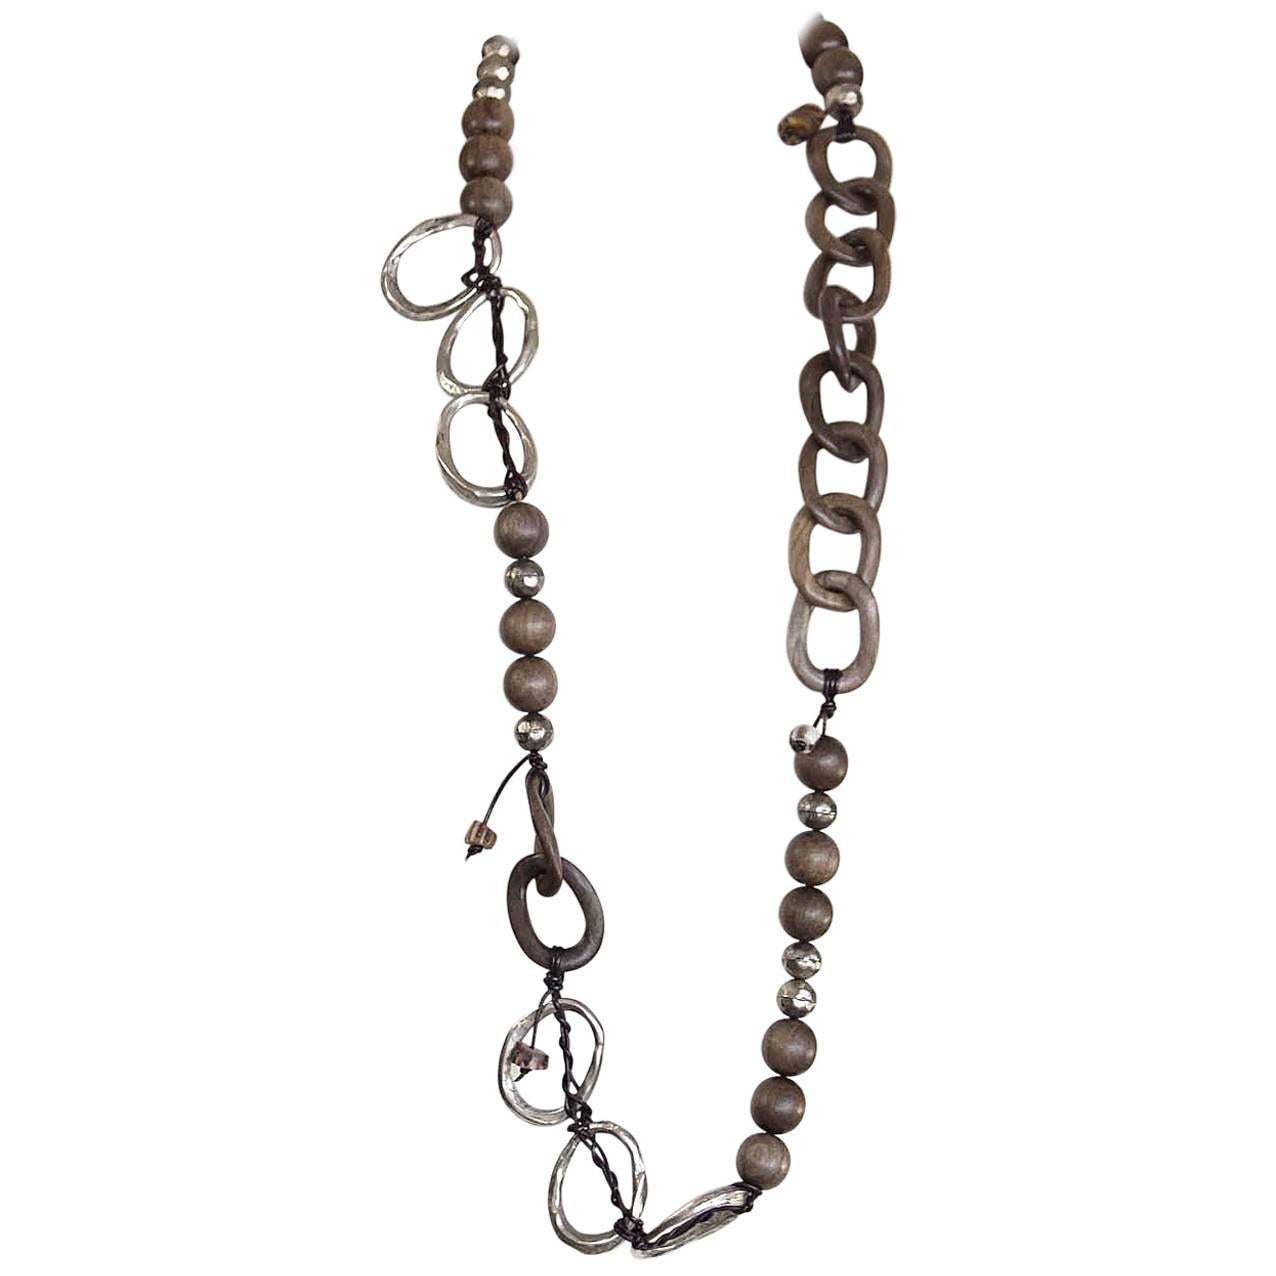 HENRY BEGUELIN Necklace Bold Wood and Distressed Metal 